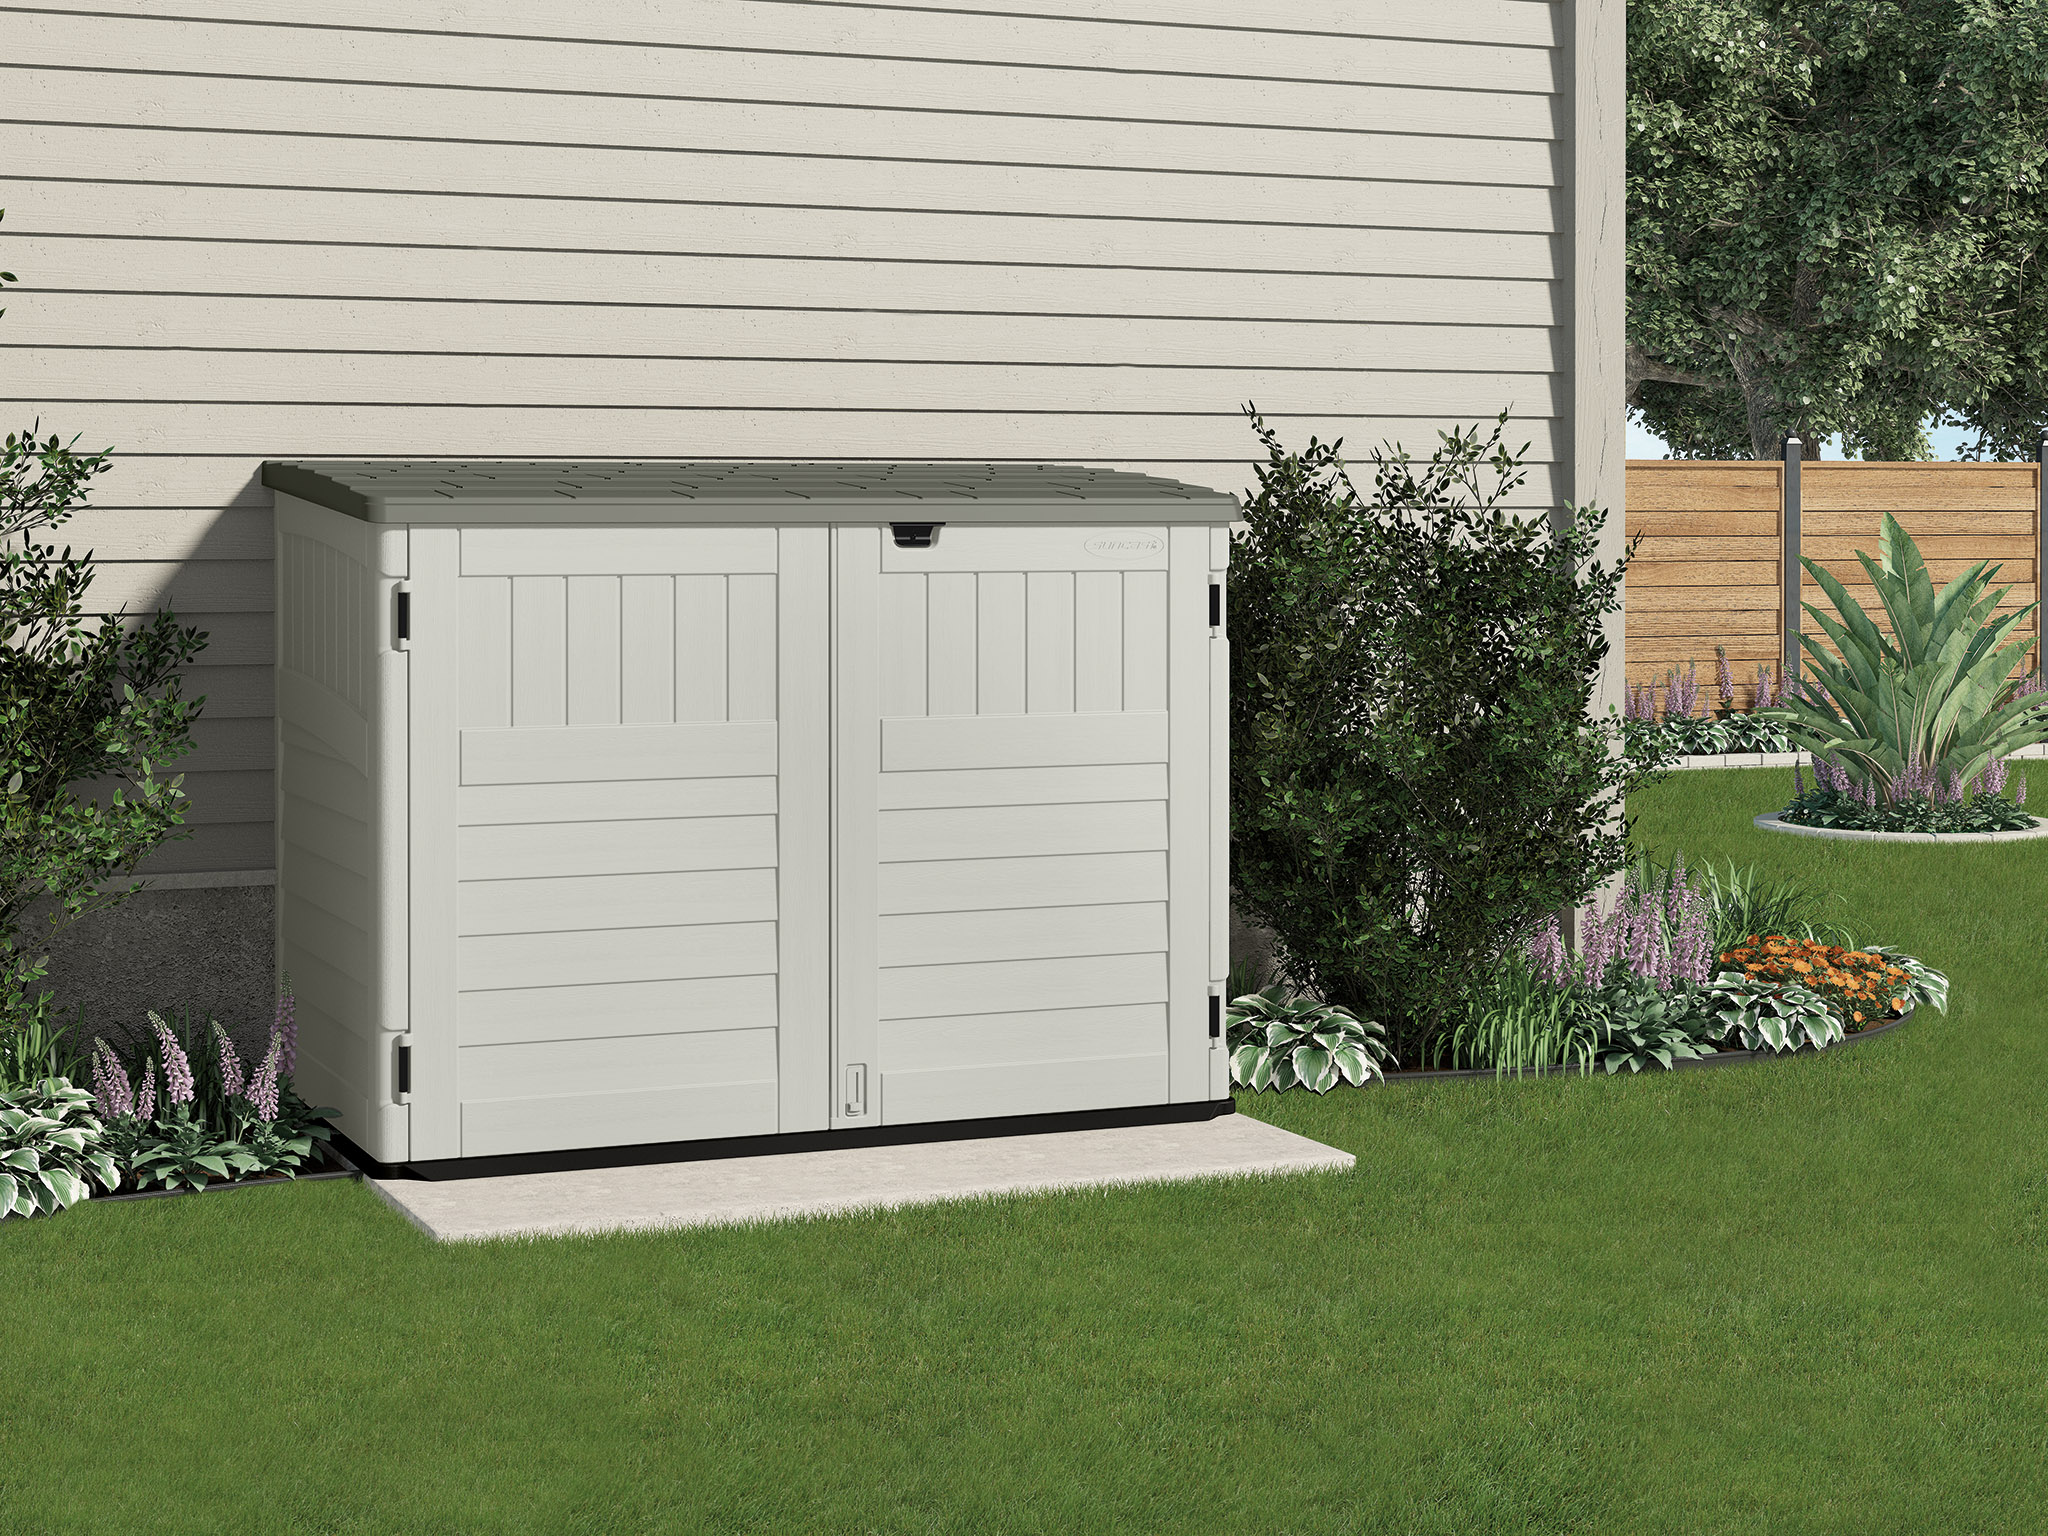 Suncast Plastic Storage Shed, Off-White and Gray, 44.25 in D x 52 in H x 70.5 in W - image 2 of 7